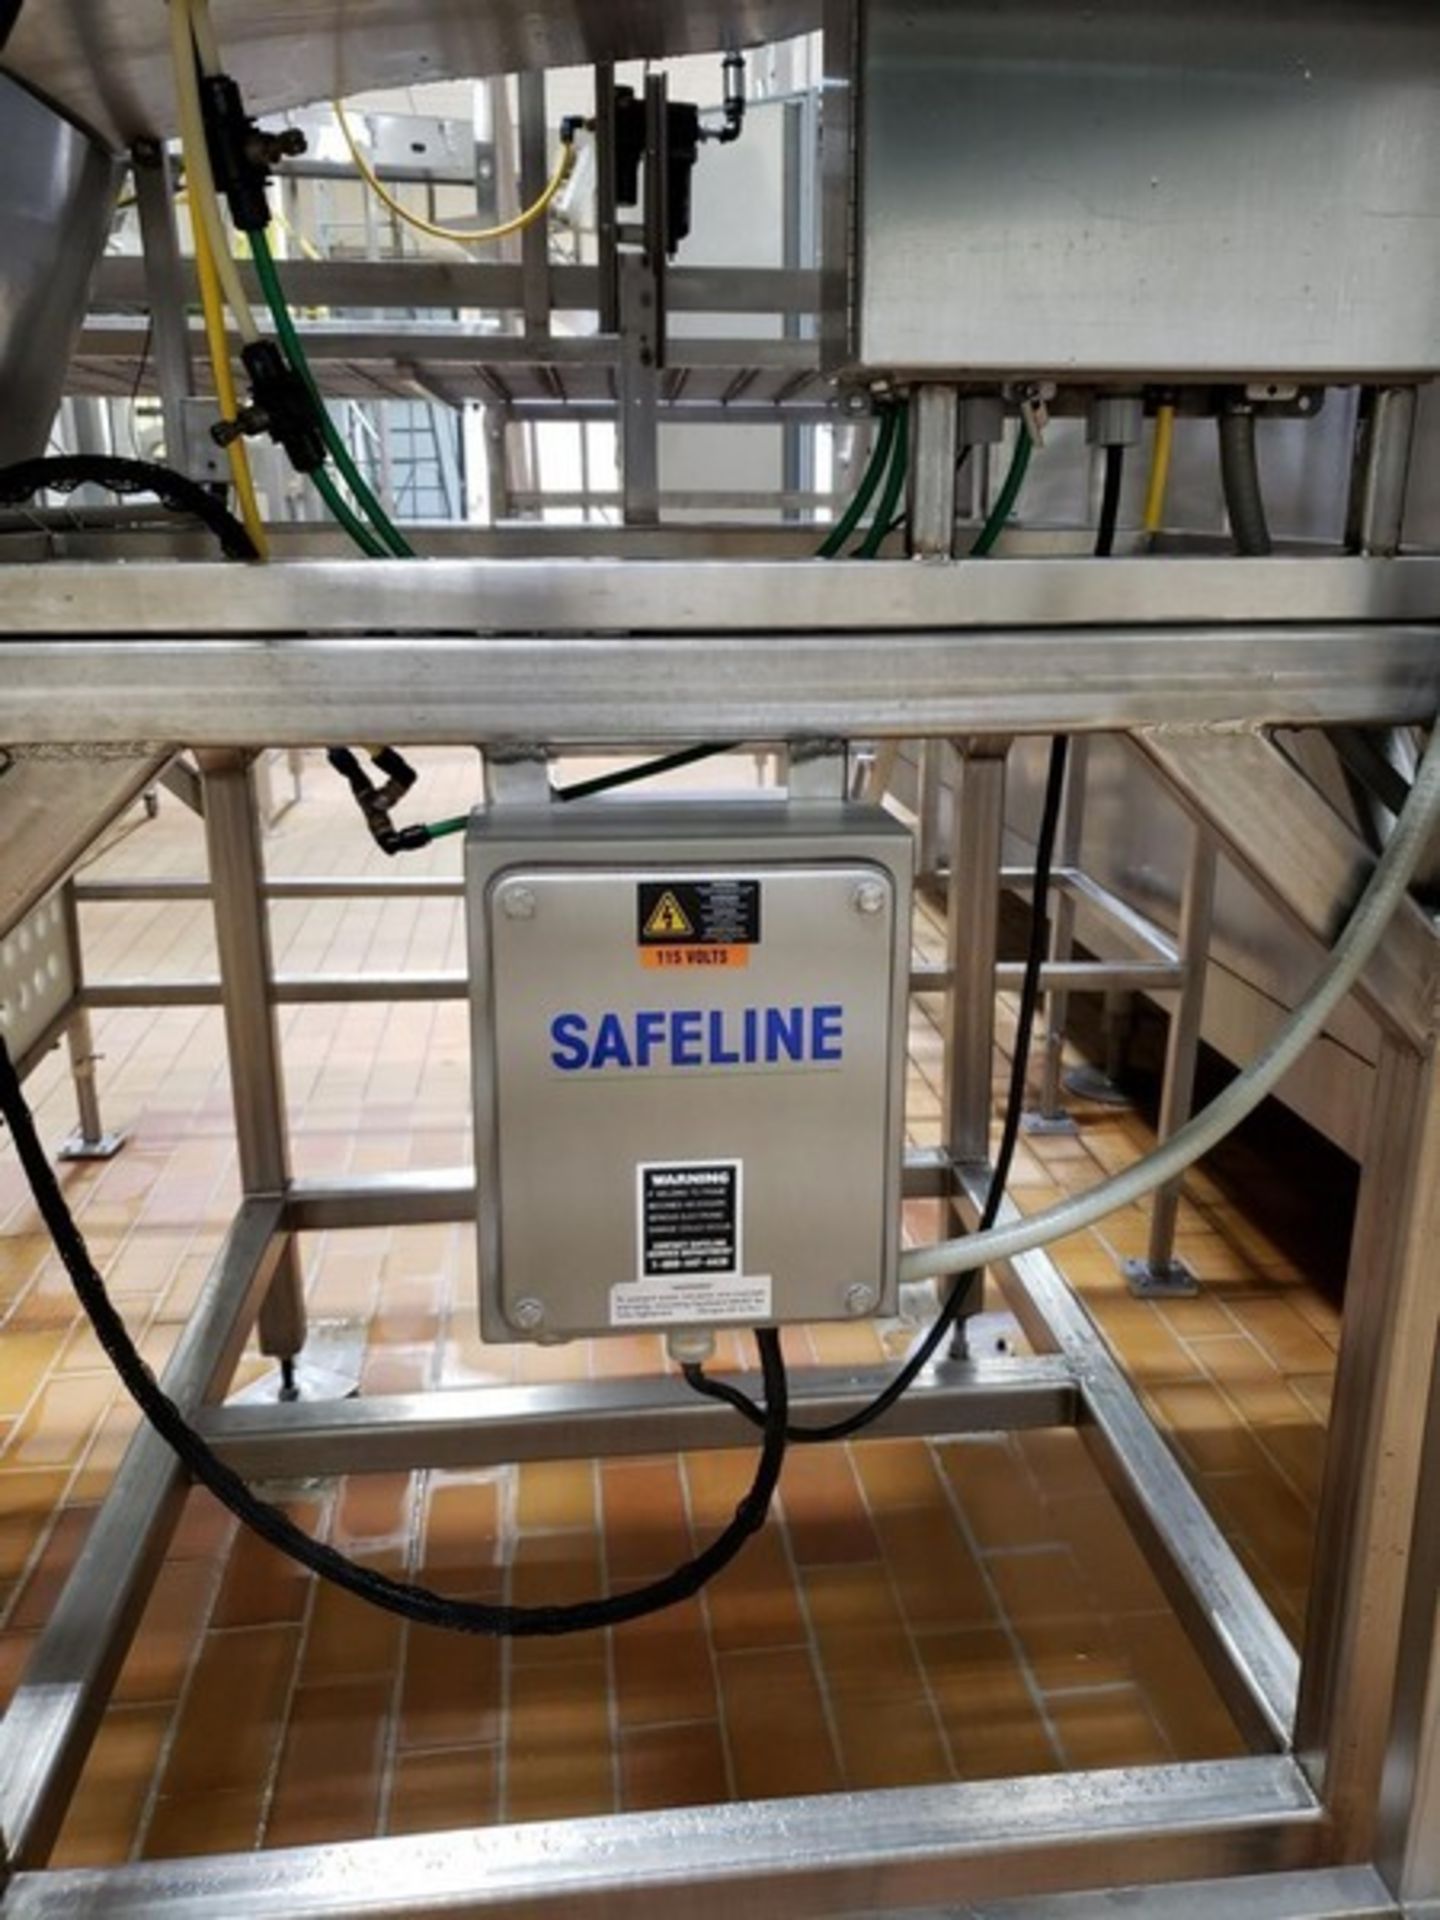 Safeline Mettler Toledo 3 x 40 S/S Sanitary Metal Detector, System was last used in a Tyson plant on - Image 21 of 22